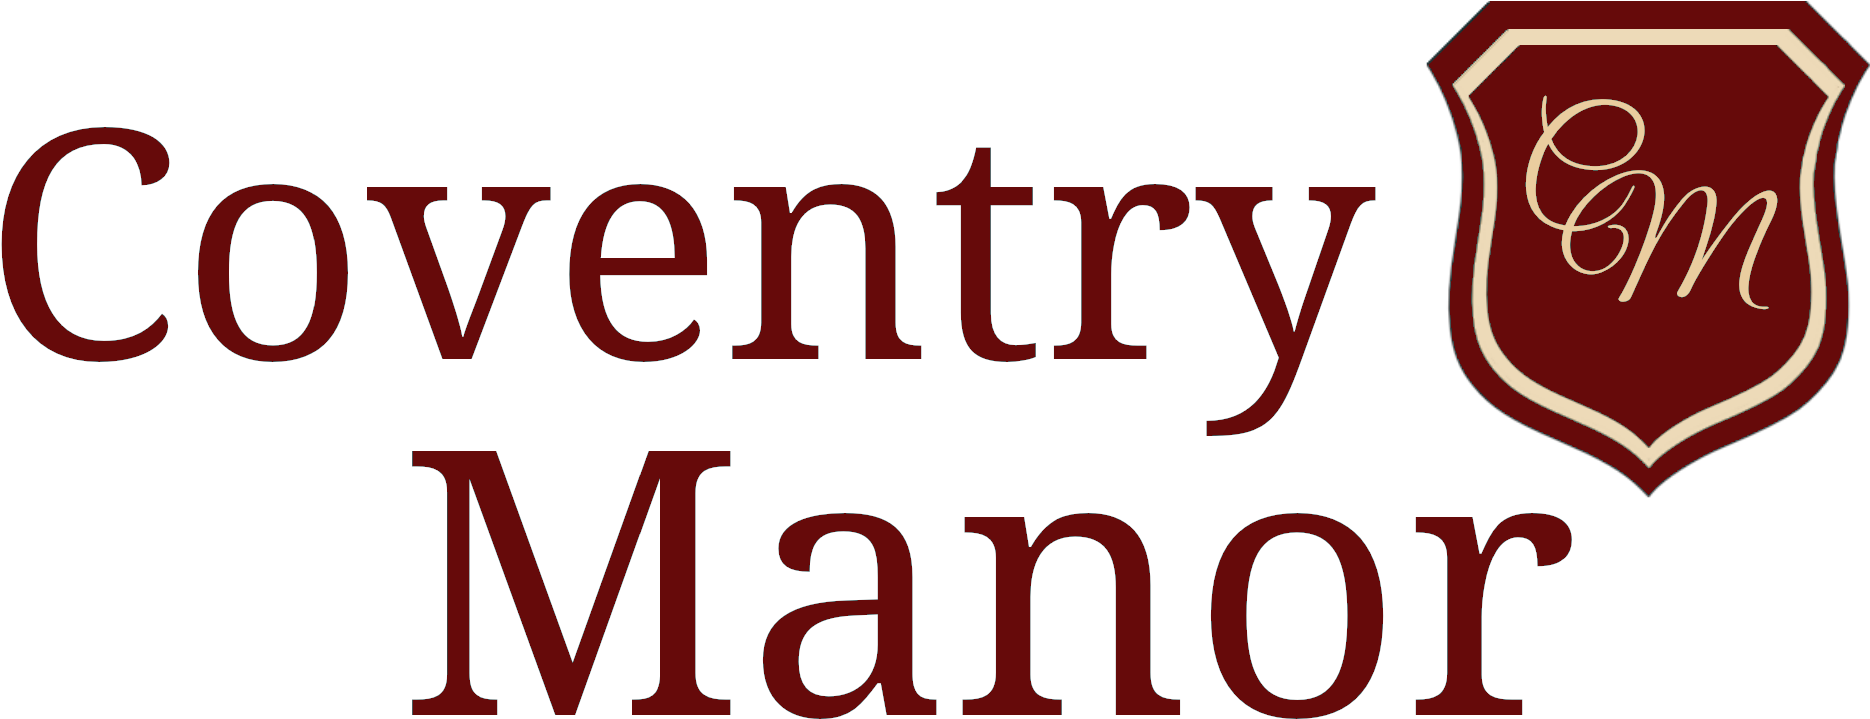 Coventry Manor Logo PNG